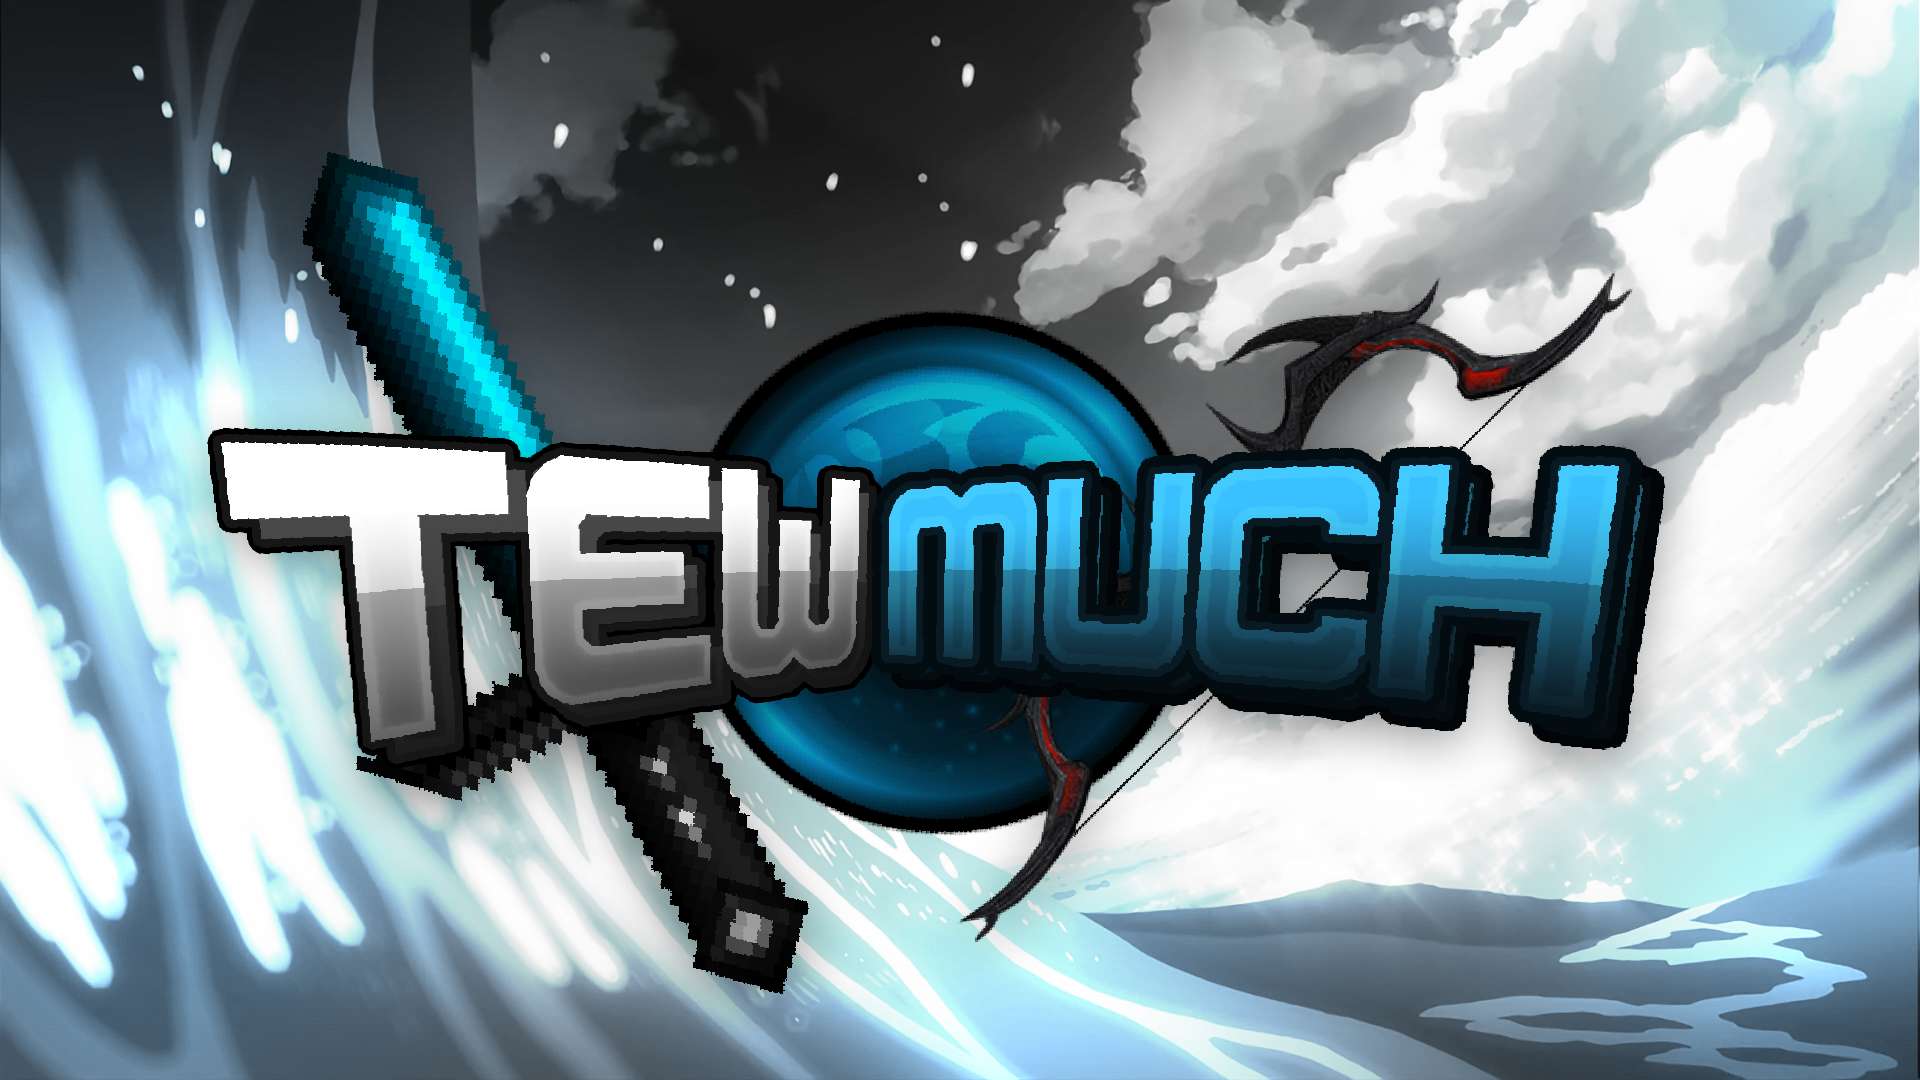 tewMuch 64 by se6n on PvPRP